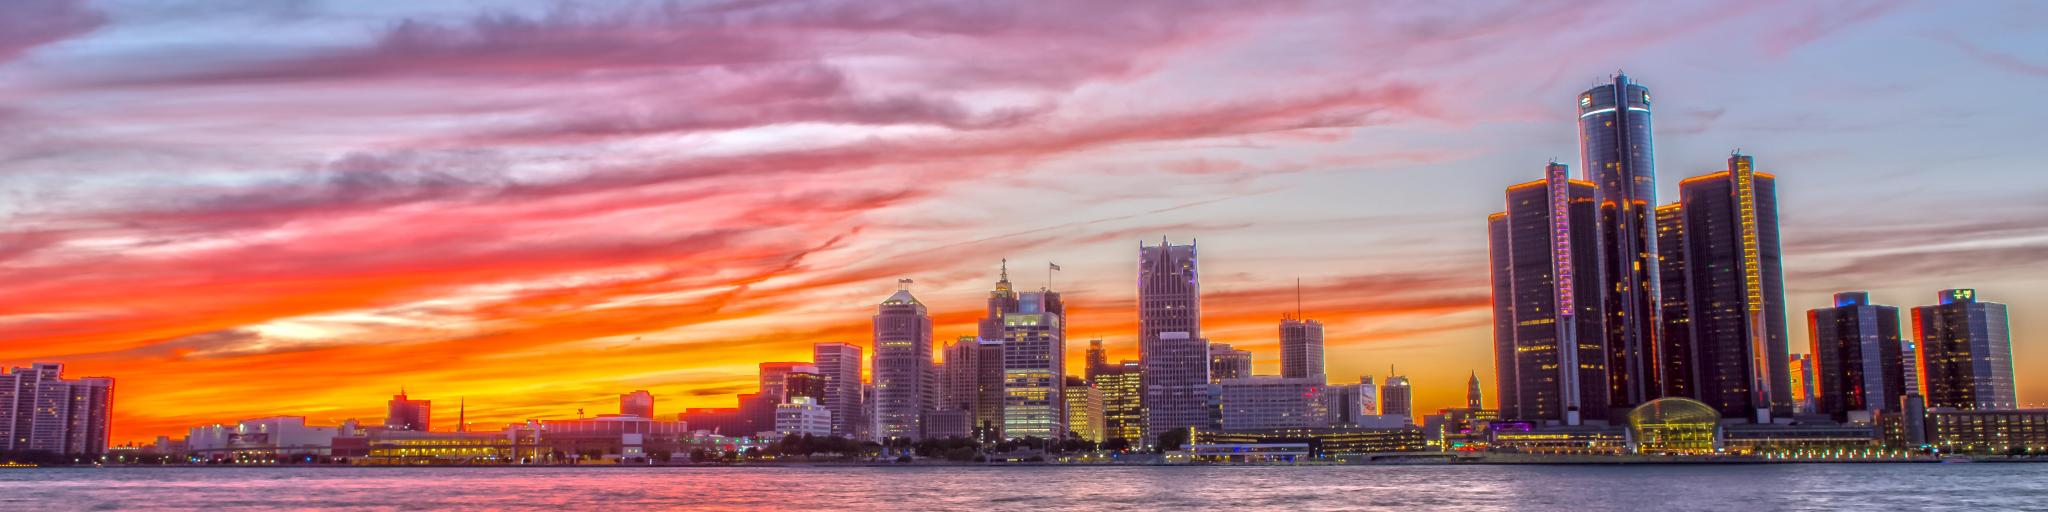 Detroit Skyline at sunset, with the river in the foreground and a purple-orange hued sky